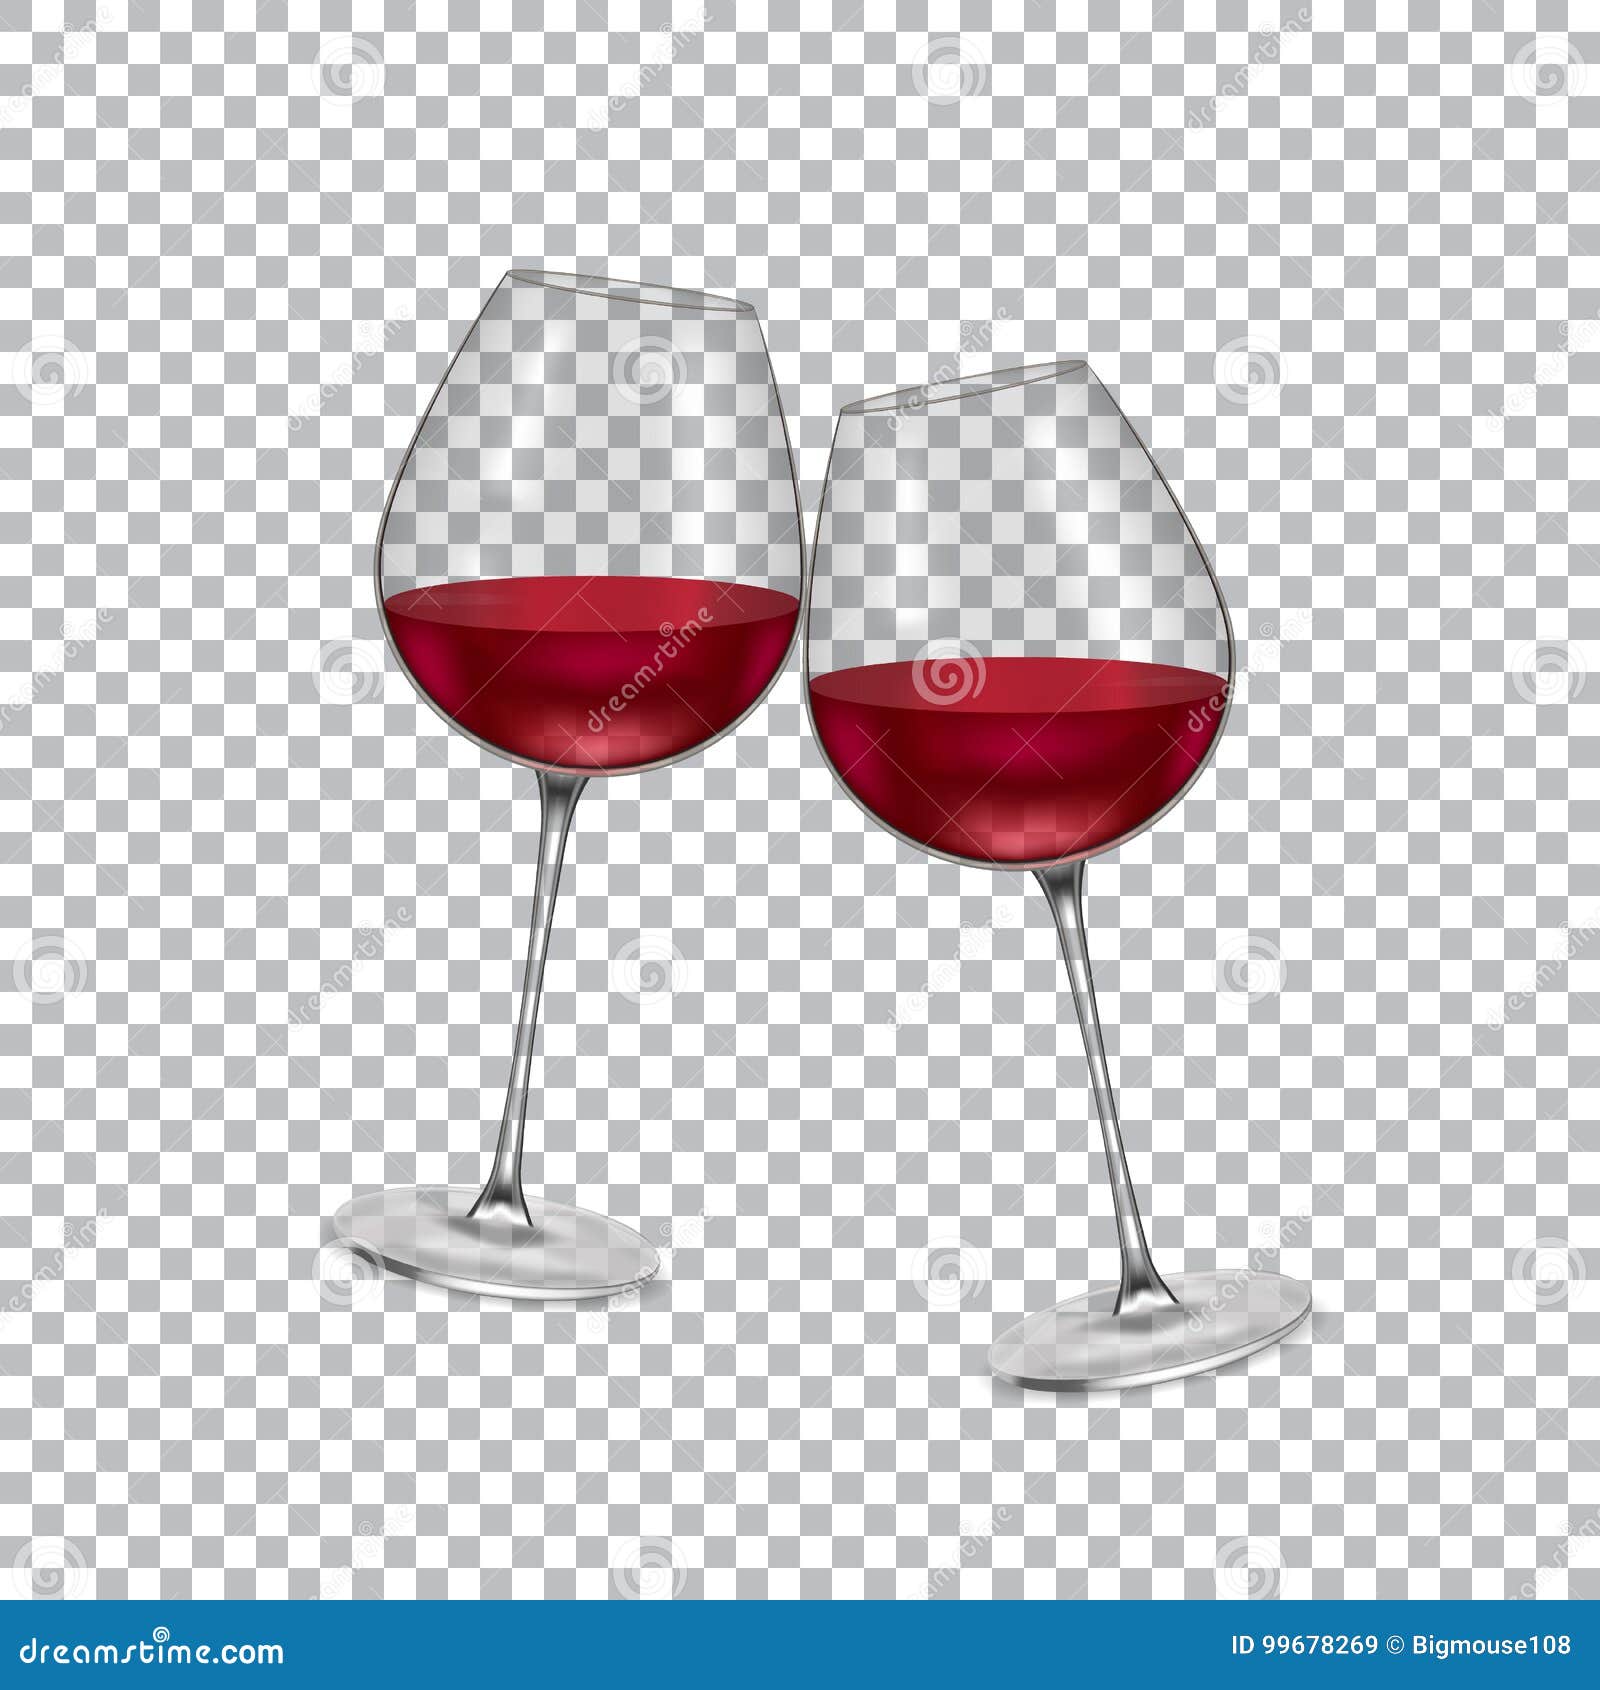 https://thumbs.dreamstime.com/z/realistic-glass-wine-transparent-background-vector-realistic-glass-red-wine-transparent-background-alcohol-99678269.jpg